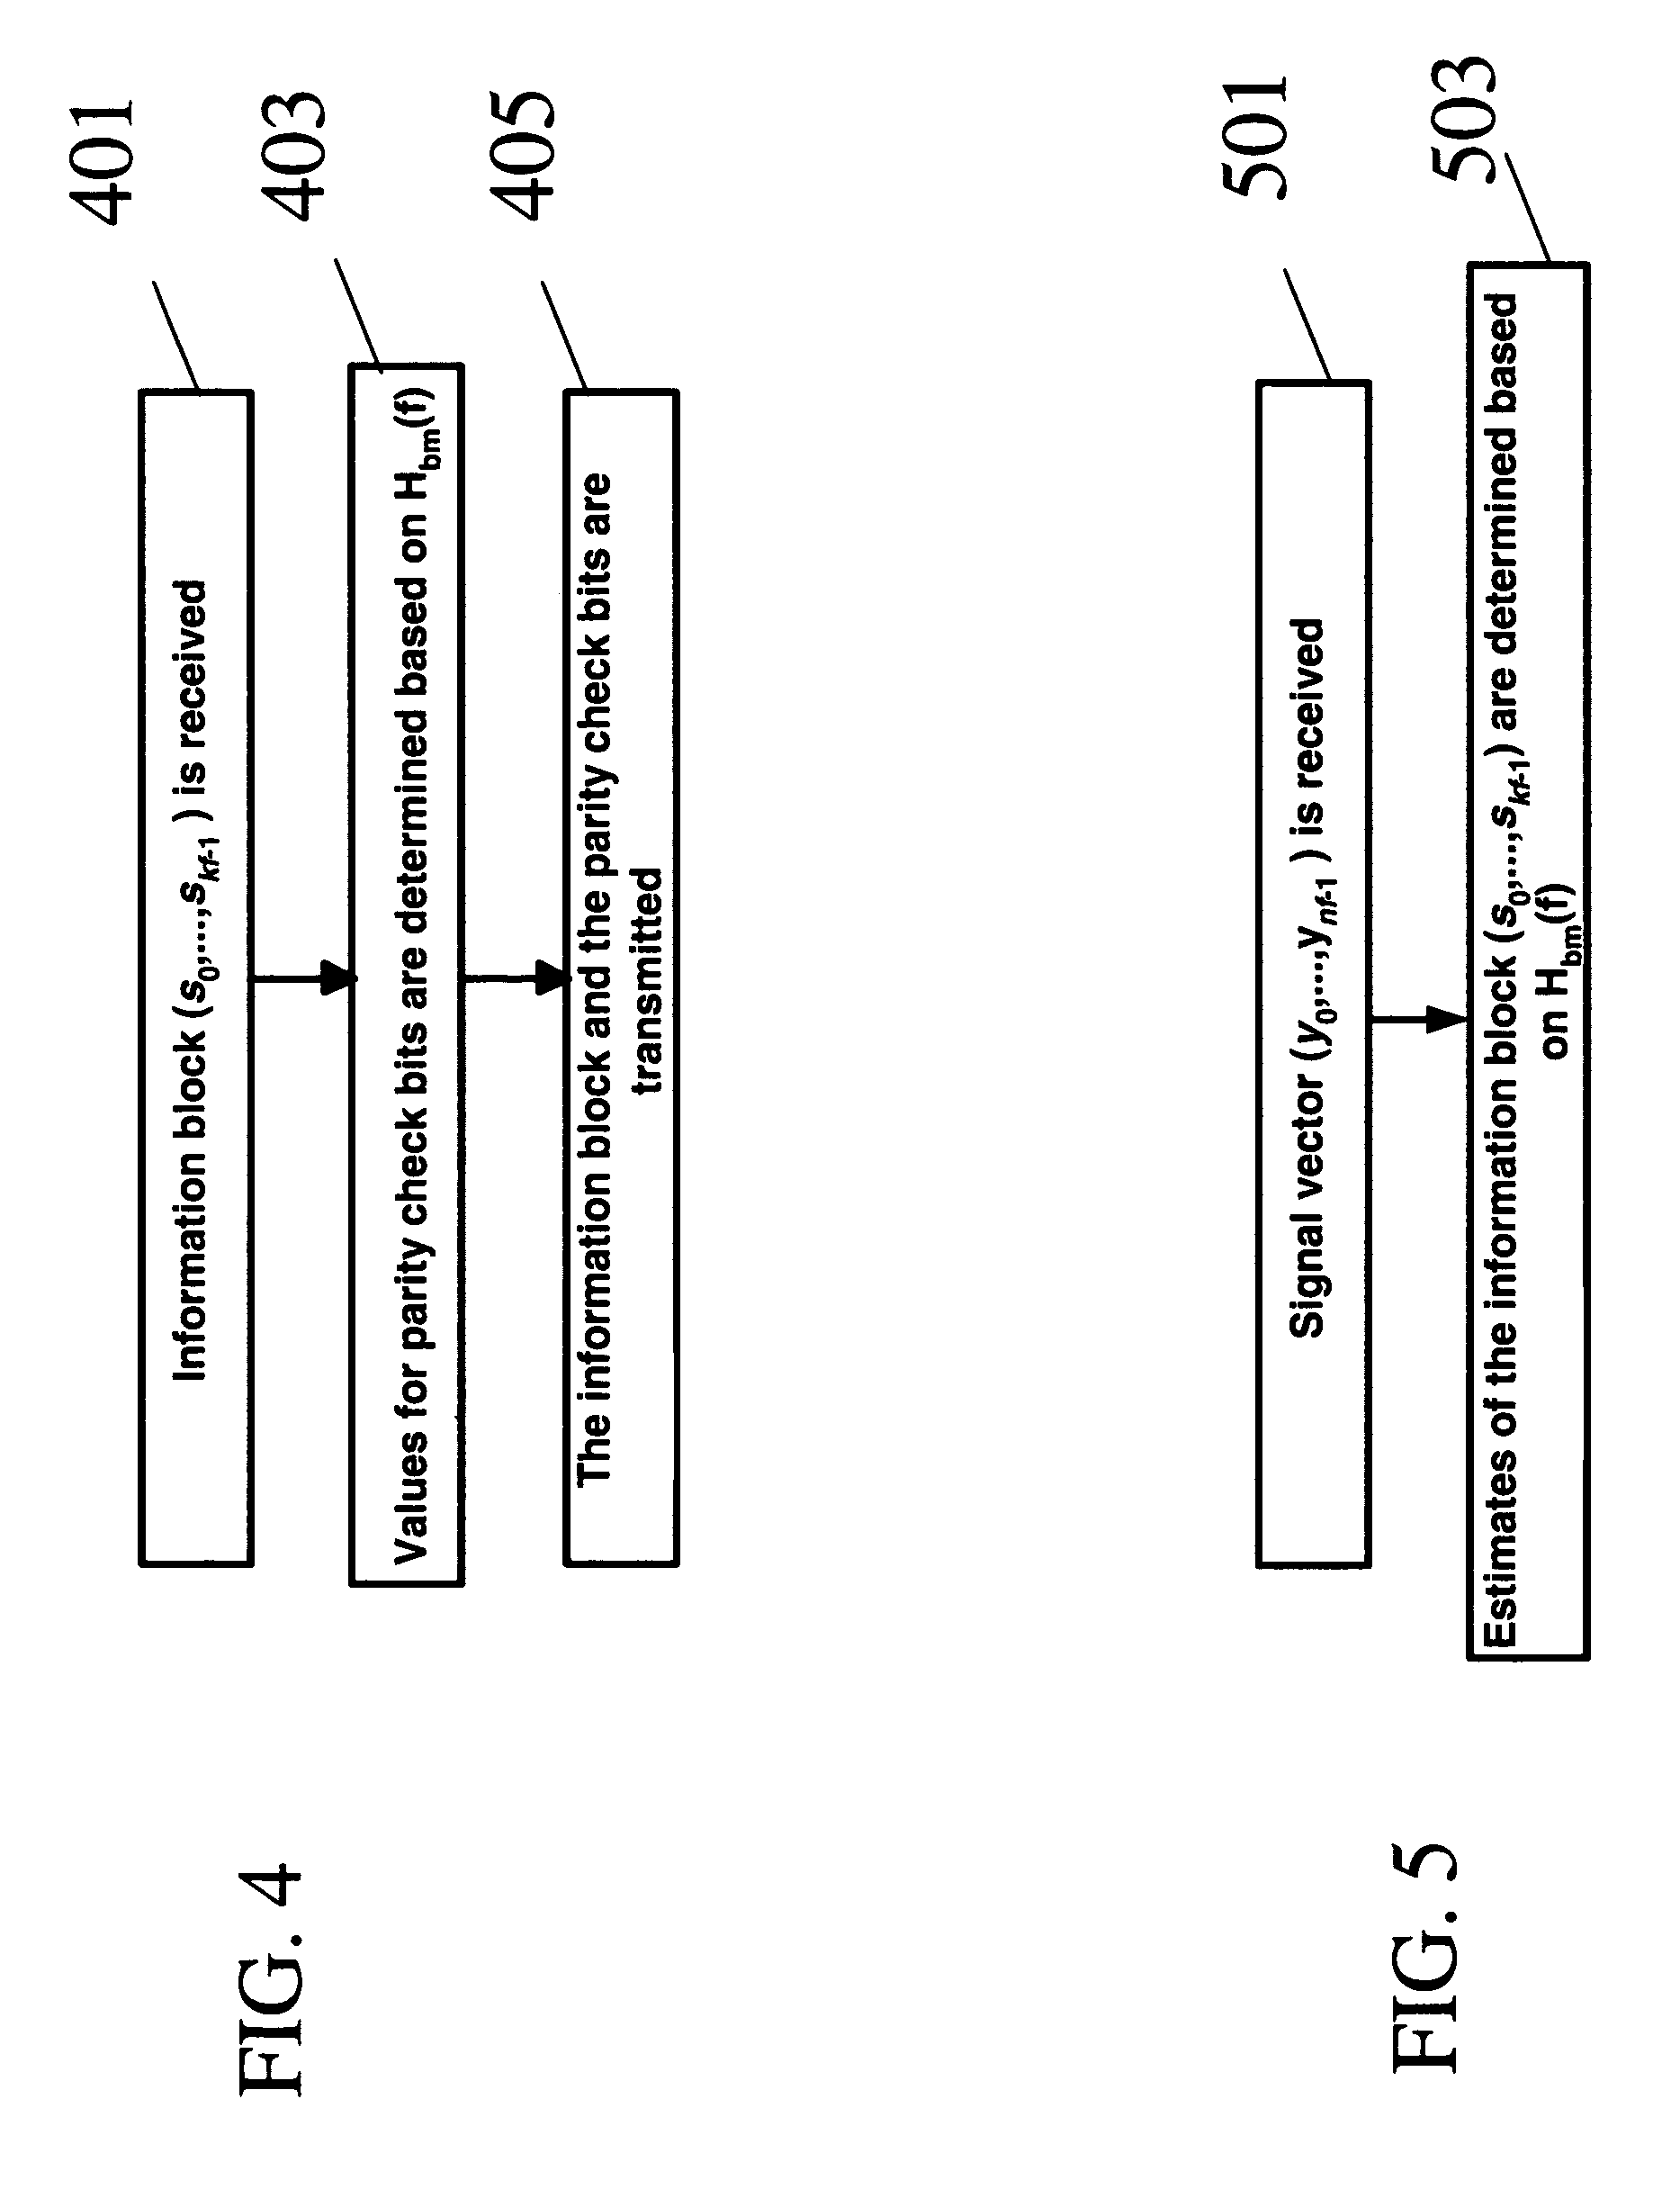 Method and apparatus for encoding and decoding data